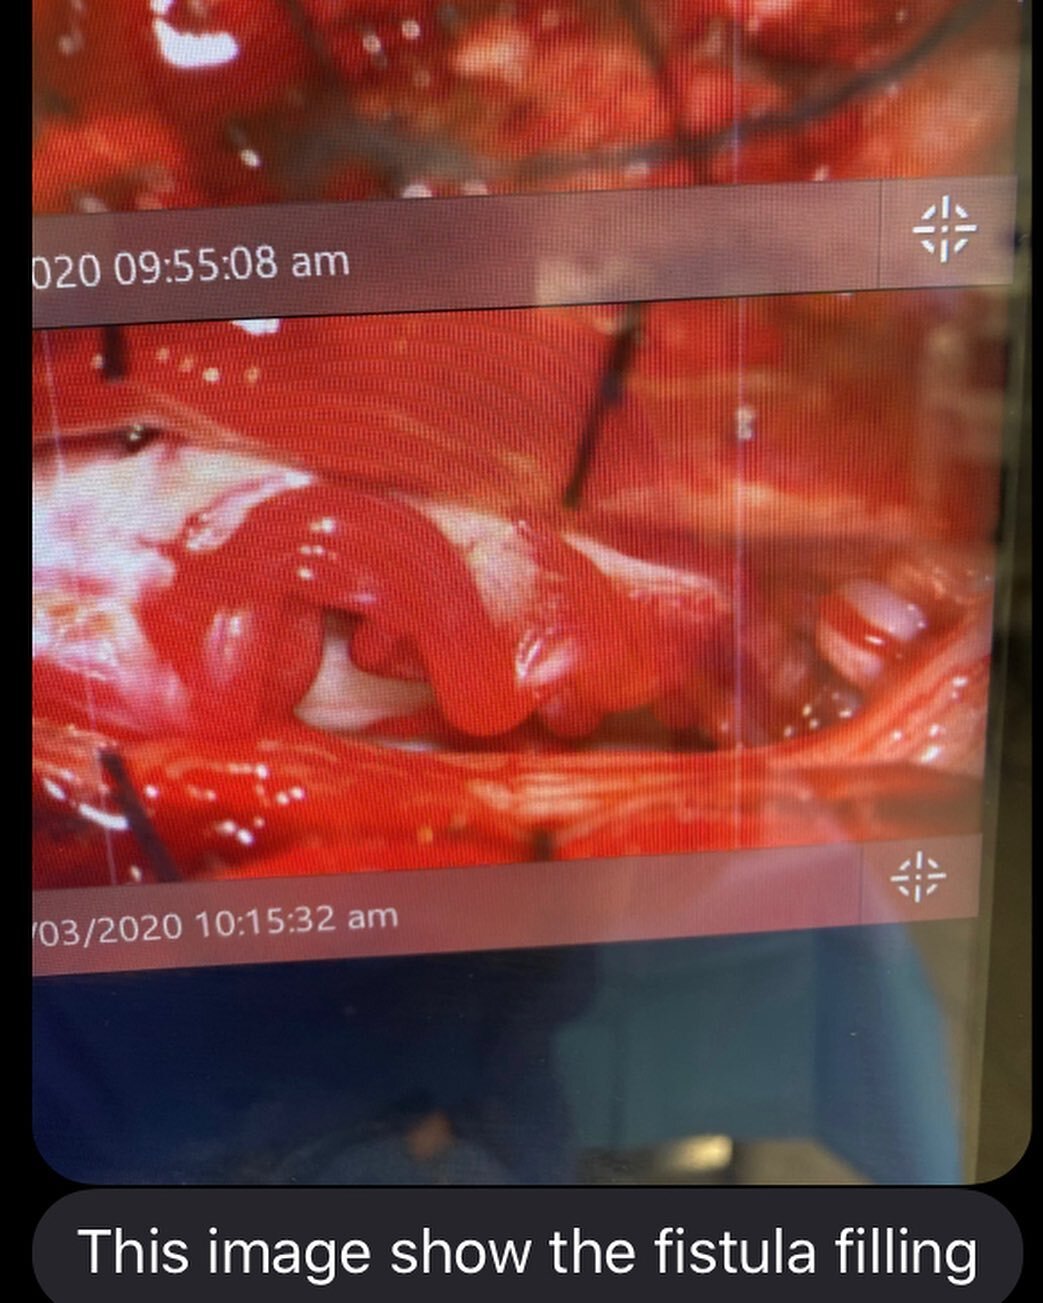 ⛑Follow up to our patient with a spinal AV fistula:

Patient was taken to surgery by Dr. Kim Williams, one of our highly skilled Amita neurosurgeons. Dr. Williams was able to treat the AVF by cutting off its flow. Swipe left to check out the sequence